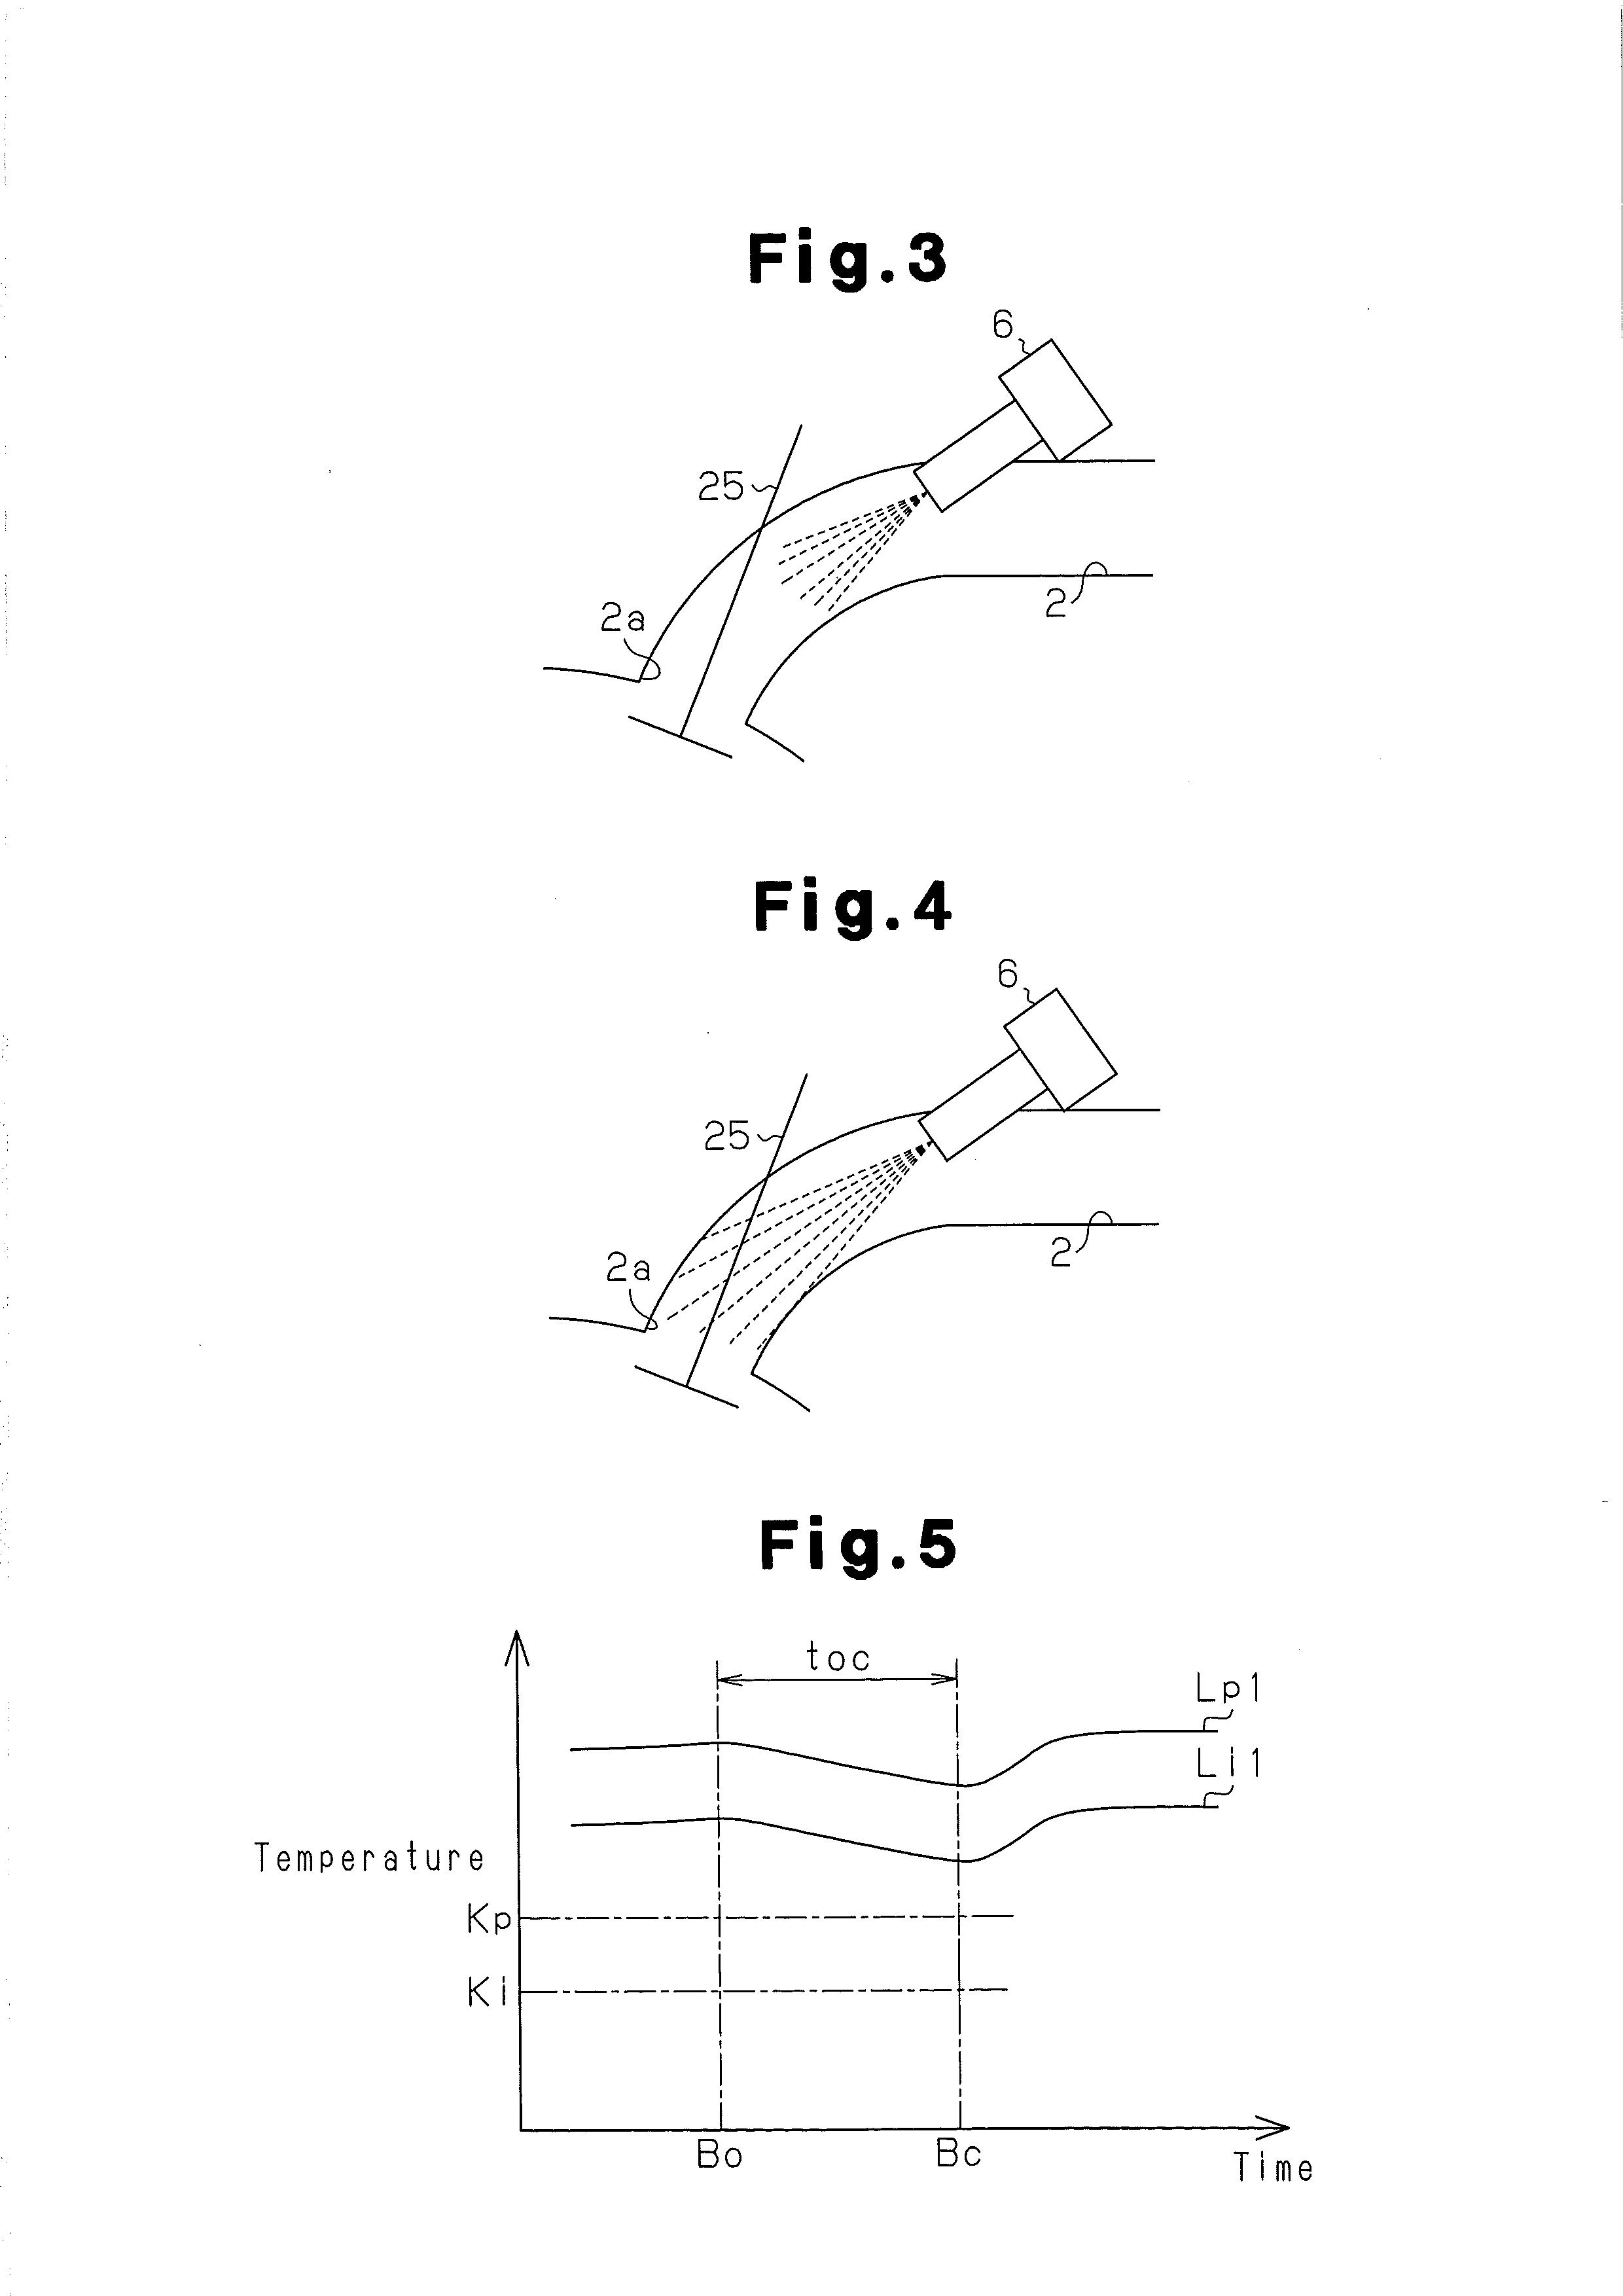 Fuel supply device for internal combustion engine